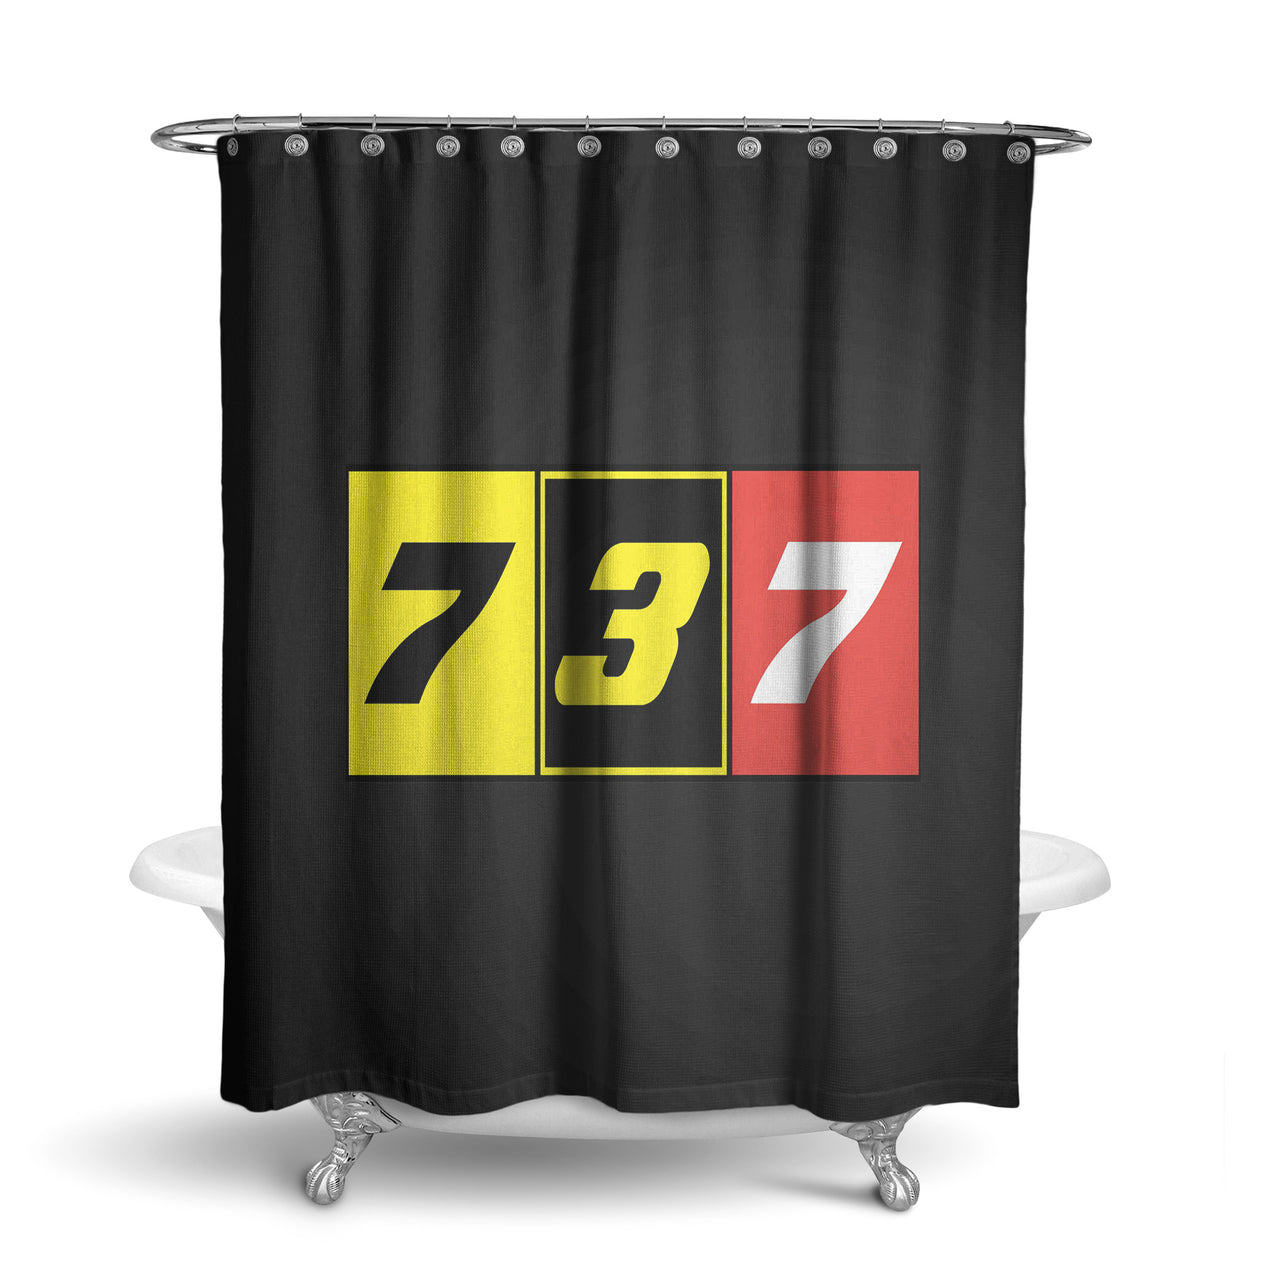 Flat Colourful 737 Designed Shower Curtains